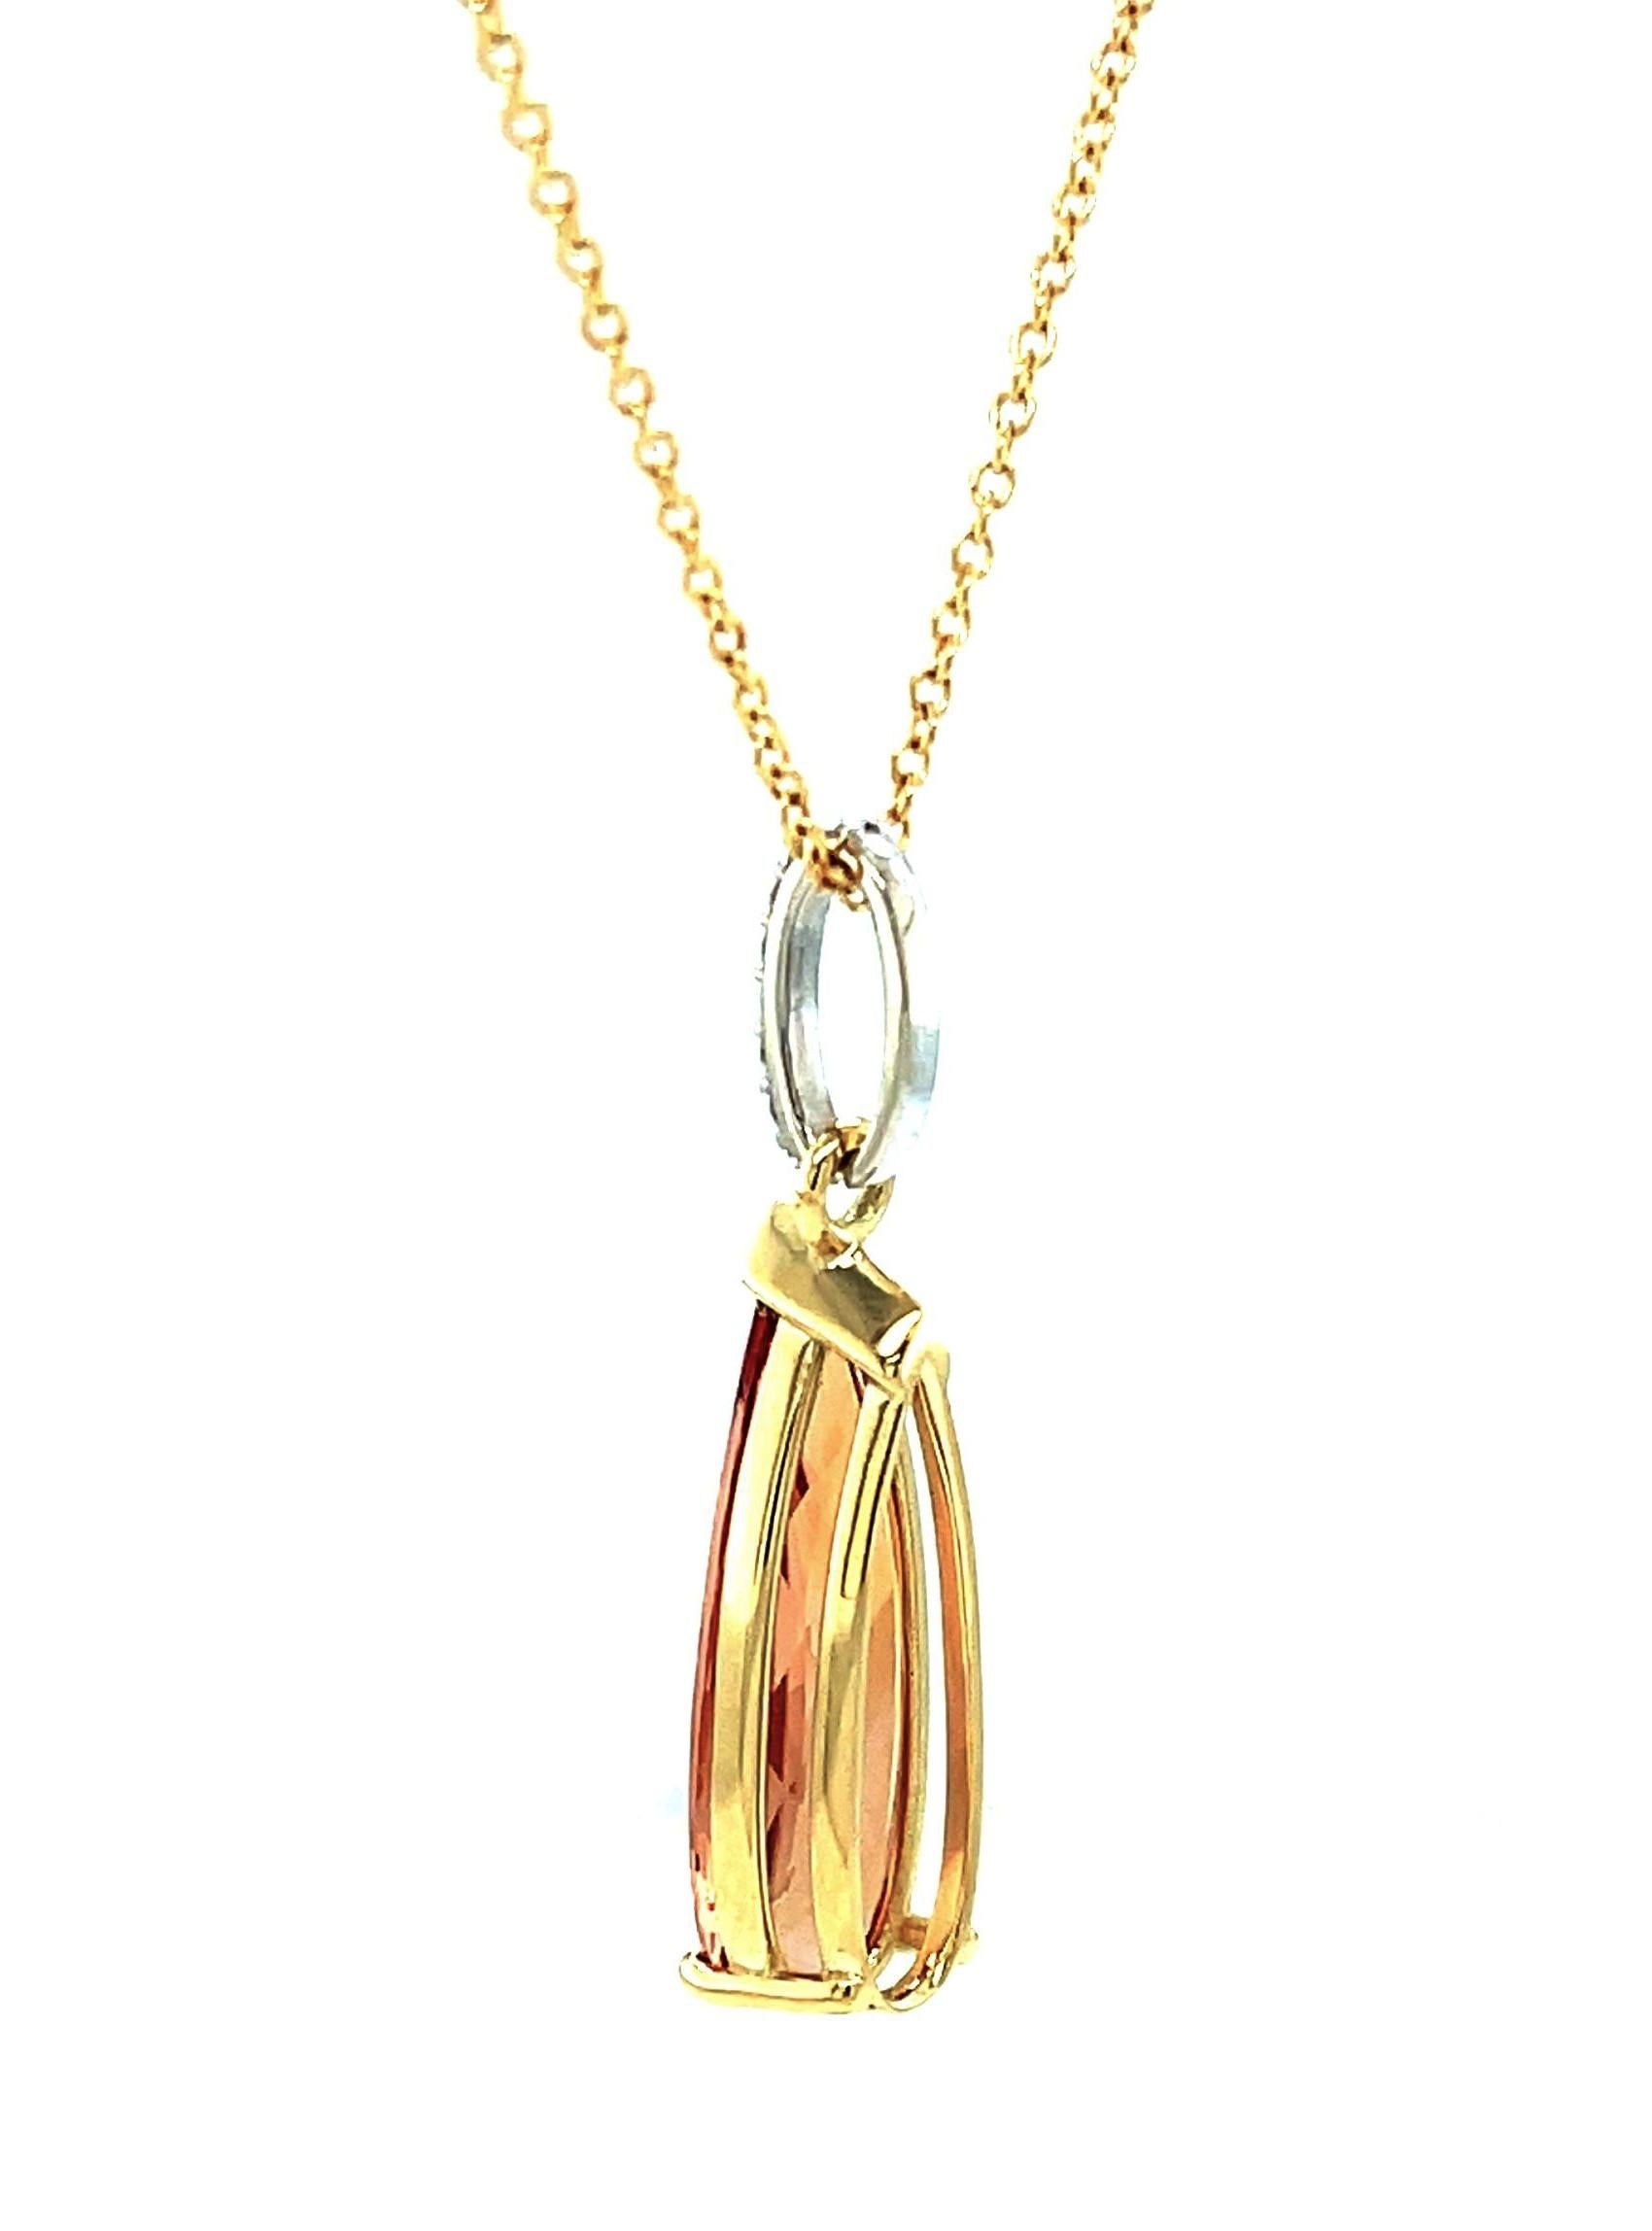 Pear Cut Imperial Topaz and Diamond Drop Necklace in White and Yellow Gold, 5.56 Carats